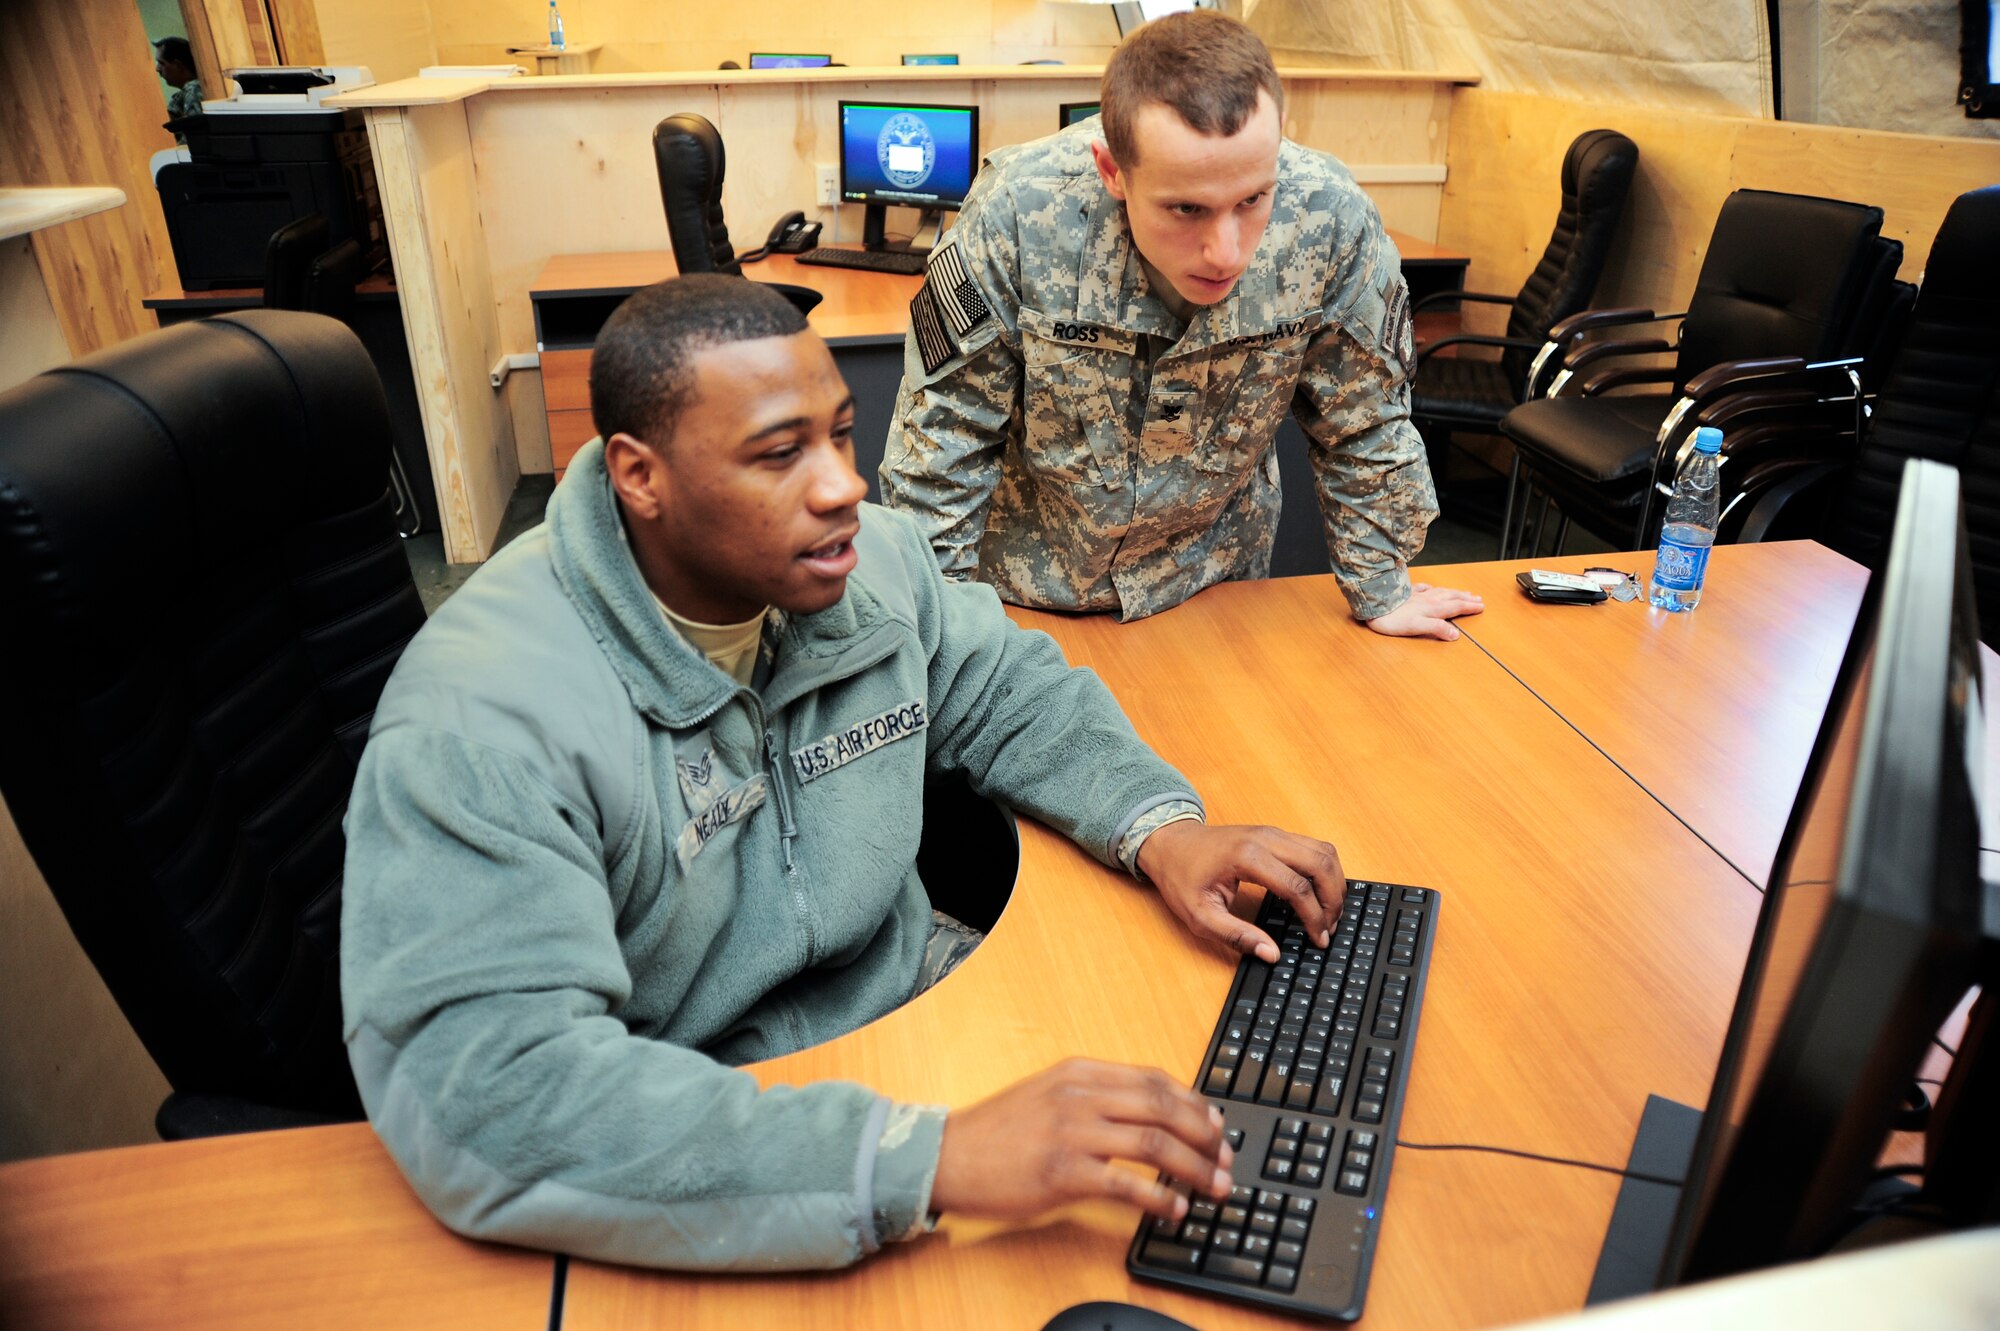 Staff Sgt. Preston Nealy installs computer software while Aviation Ordnanceman 2nd Class John Ross watches Jan. 25, 2012, at the Naval Forces Central Command Forward Headquarters Manas at the Transit Center at Manas, Kyrgyzstan. Nealy is a client systems technician with the 376th Expeditionary Communications Squadron, deployed here from MacDill Air Force Base, Fla. Ross is a liaison officer deployed here from the Naval Operations Support Center in Long Island, N.Y.(U.S. Air Force Photo/Staff Sgt. Angela Ruiz)